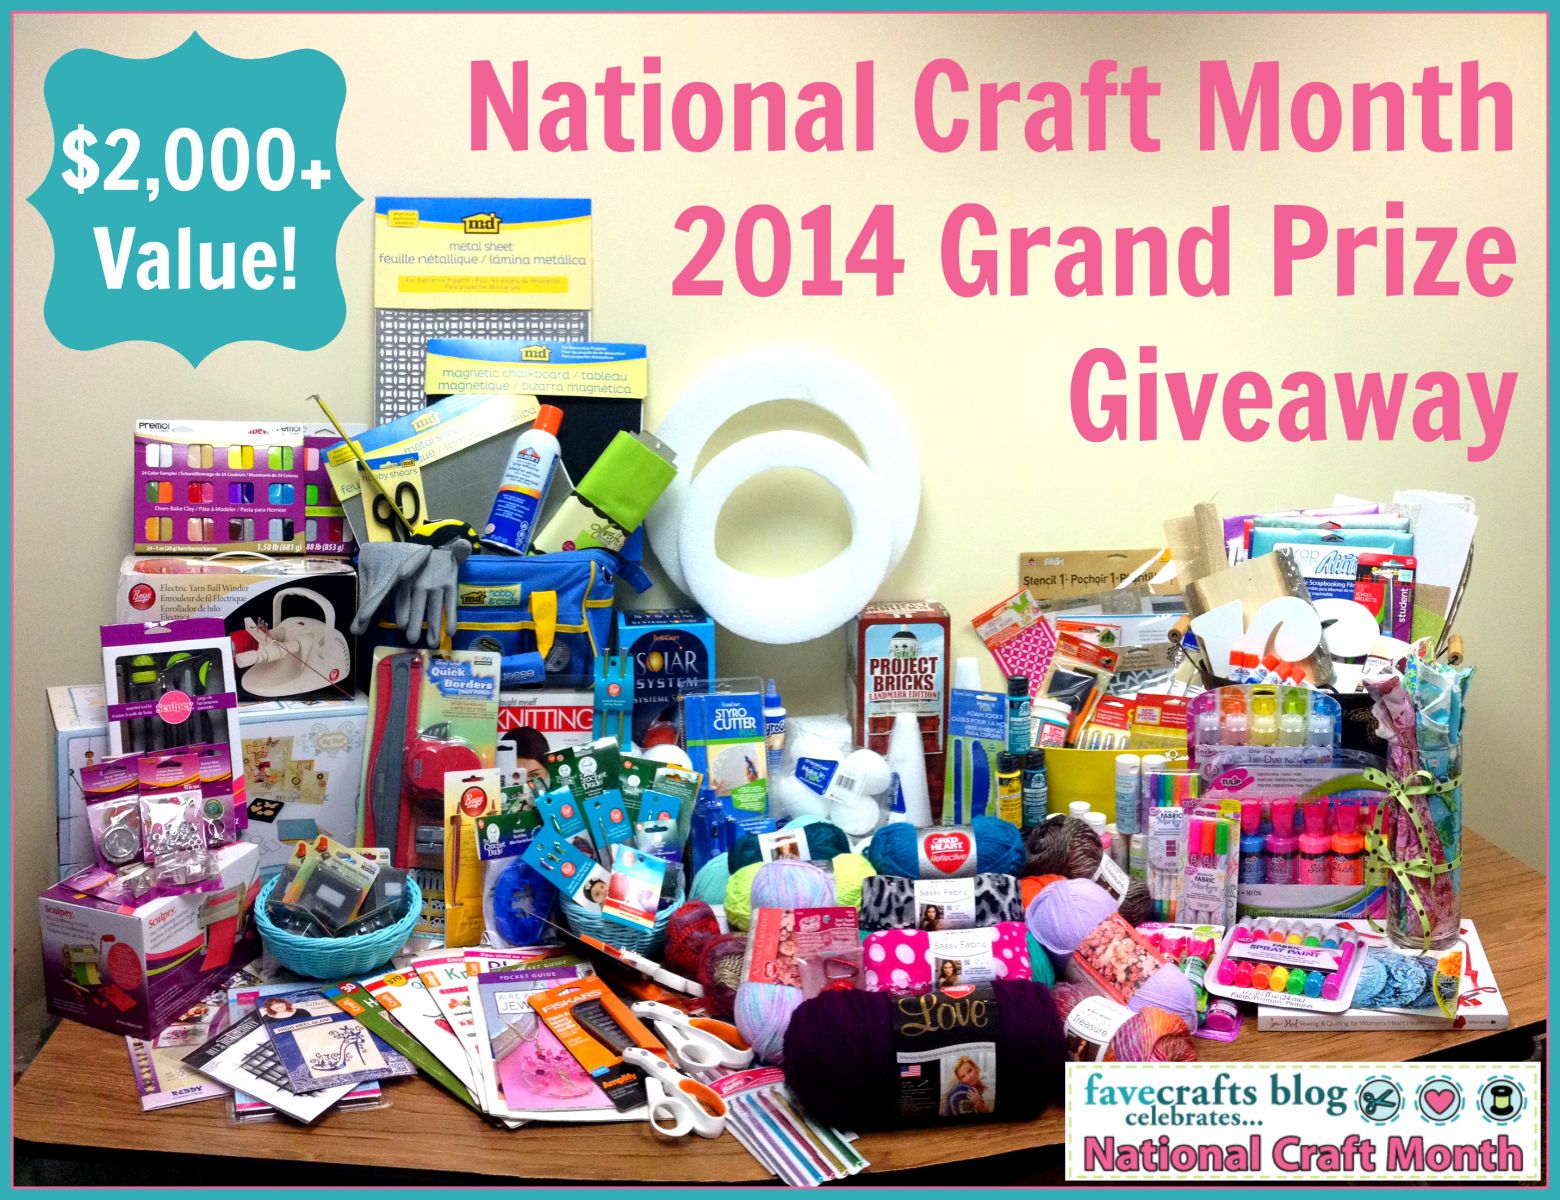 National Craft Month 2014 Grand Prize Giveaway